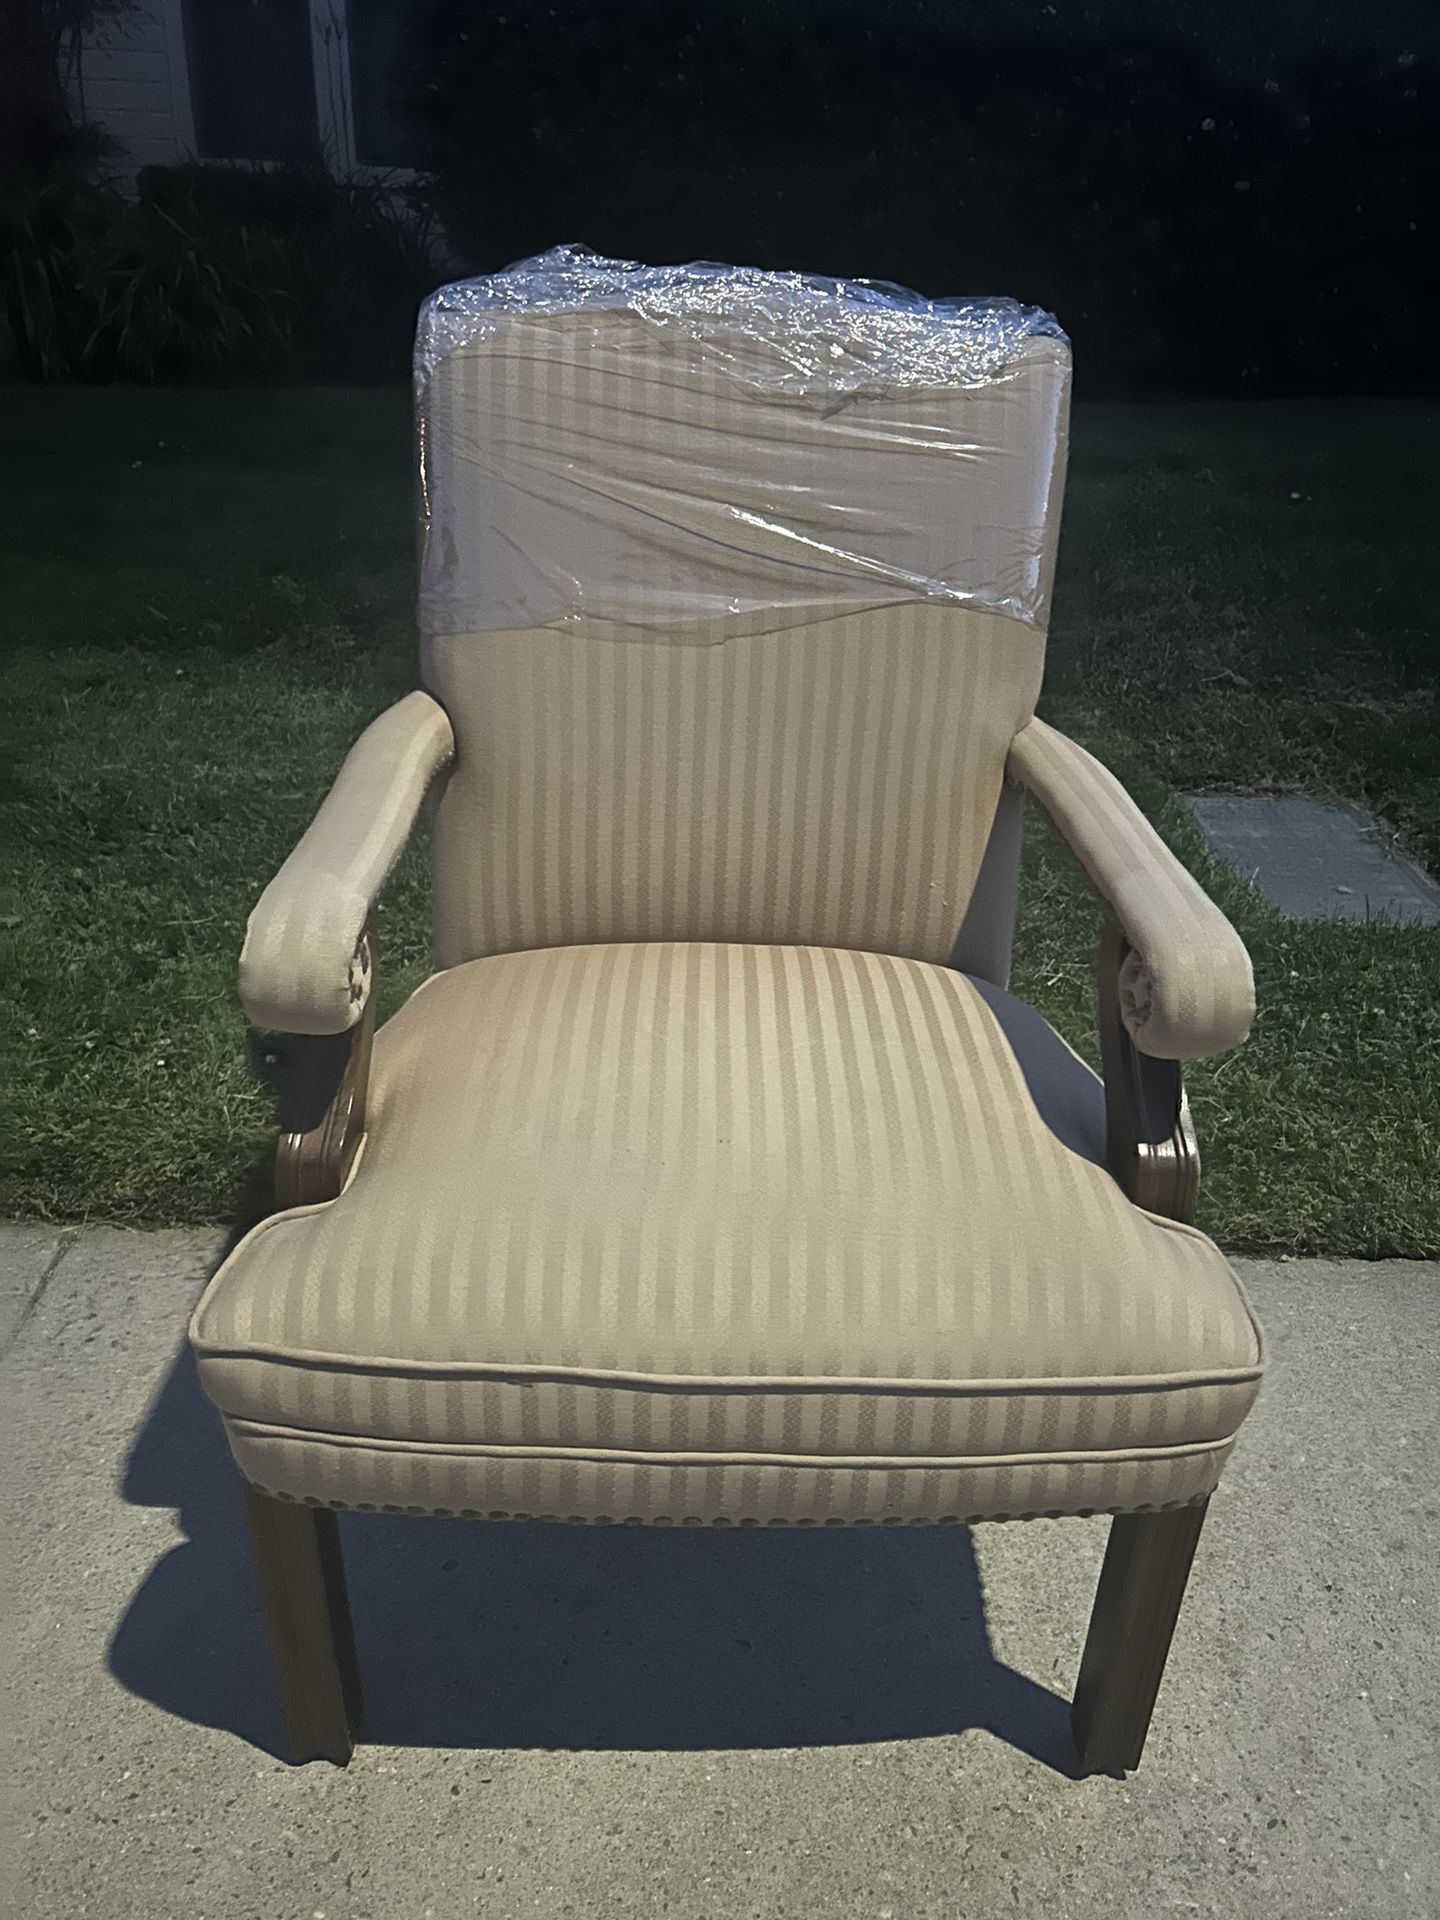 Lux Sitting Chair